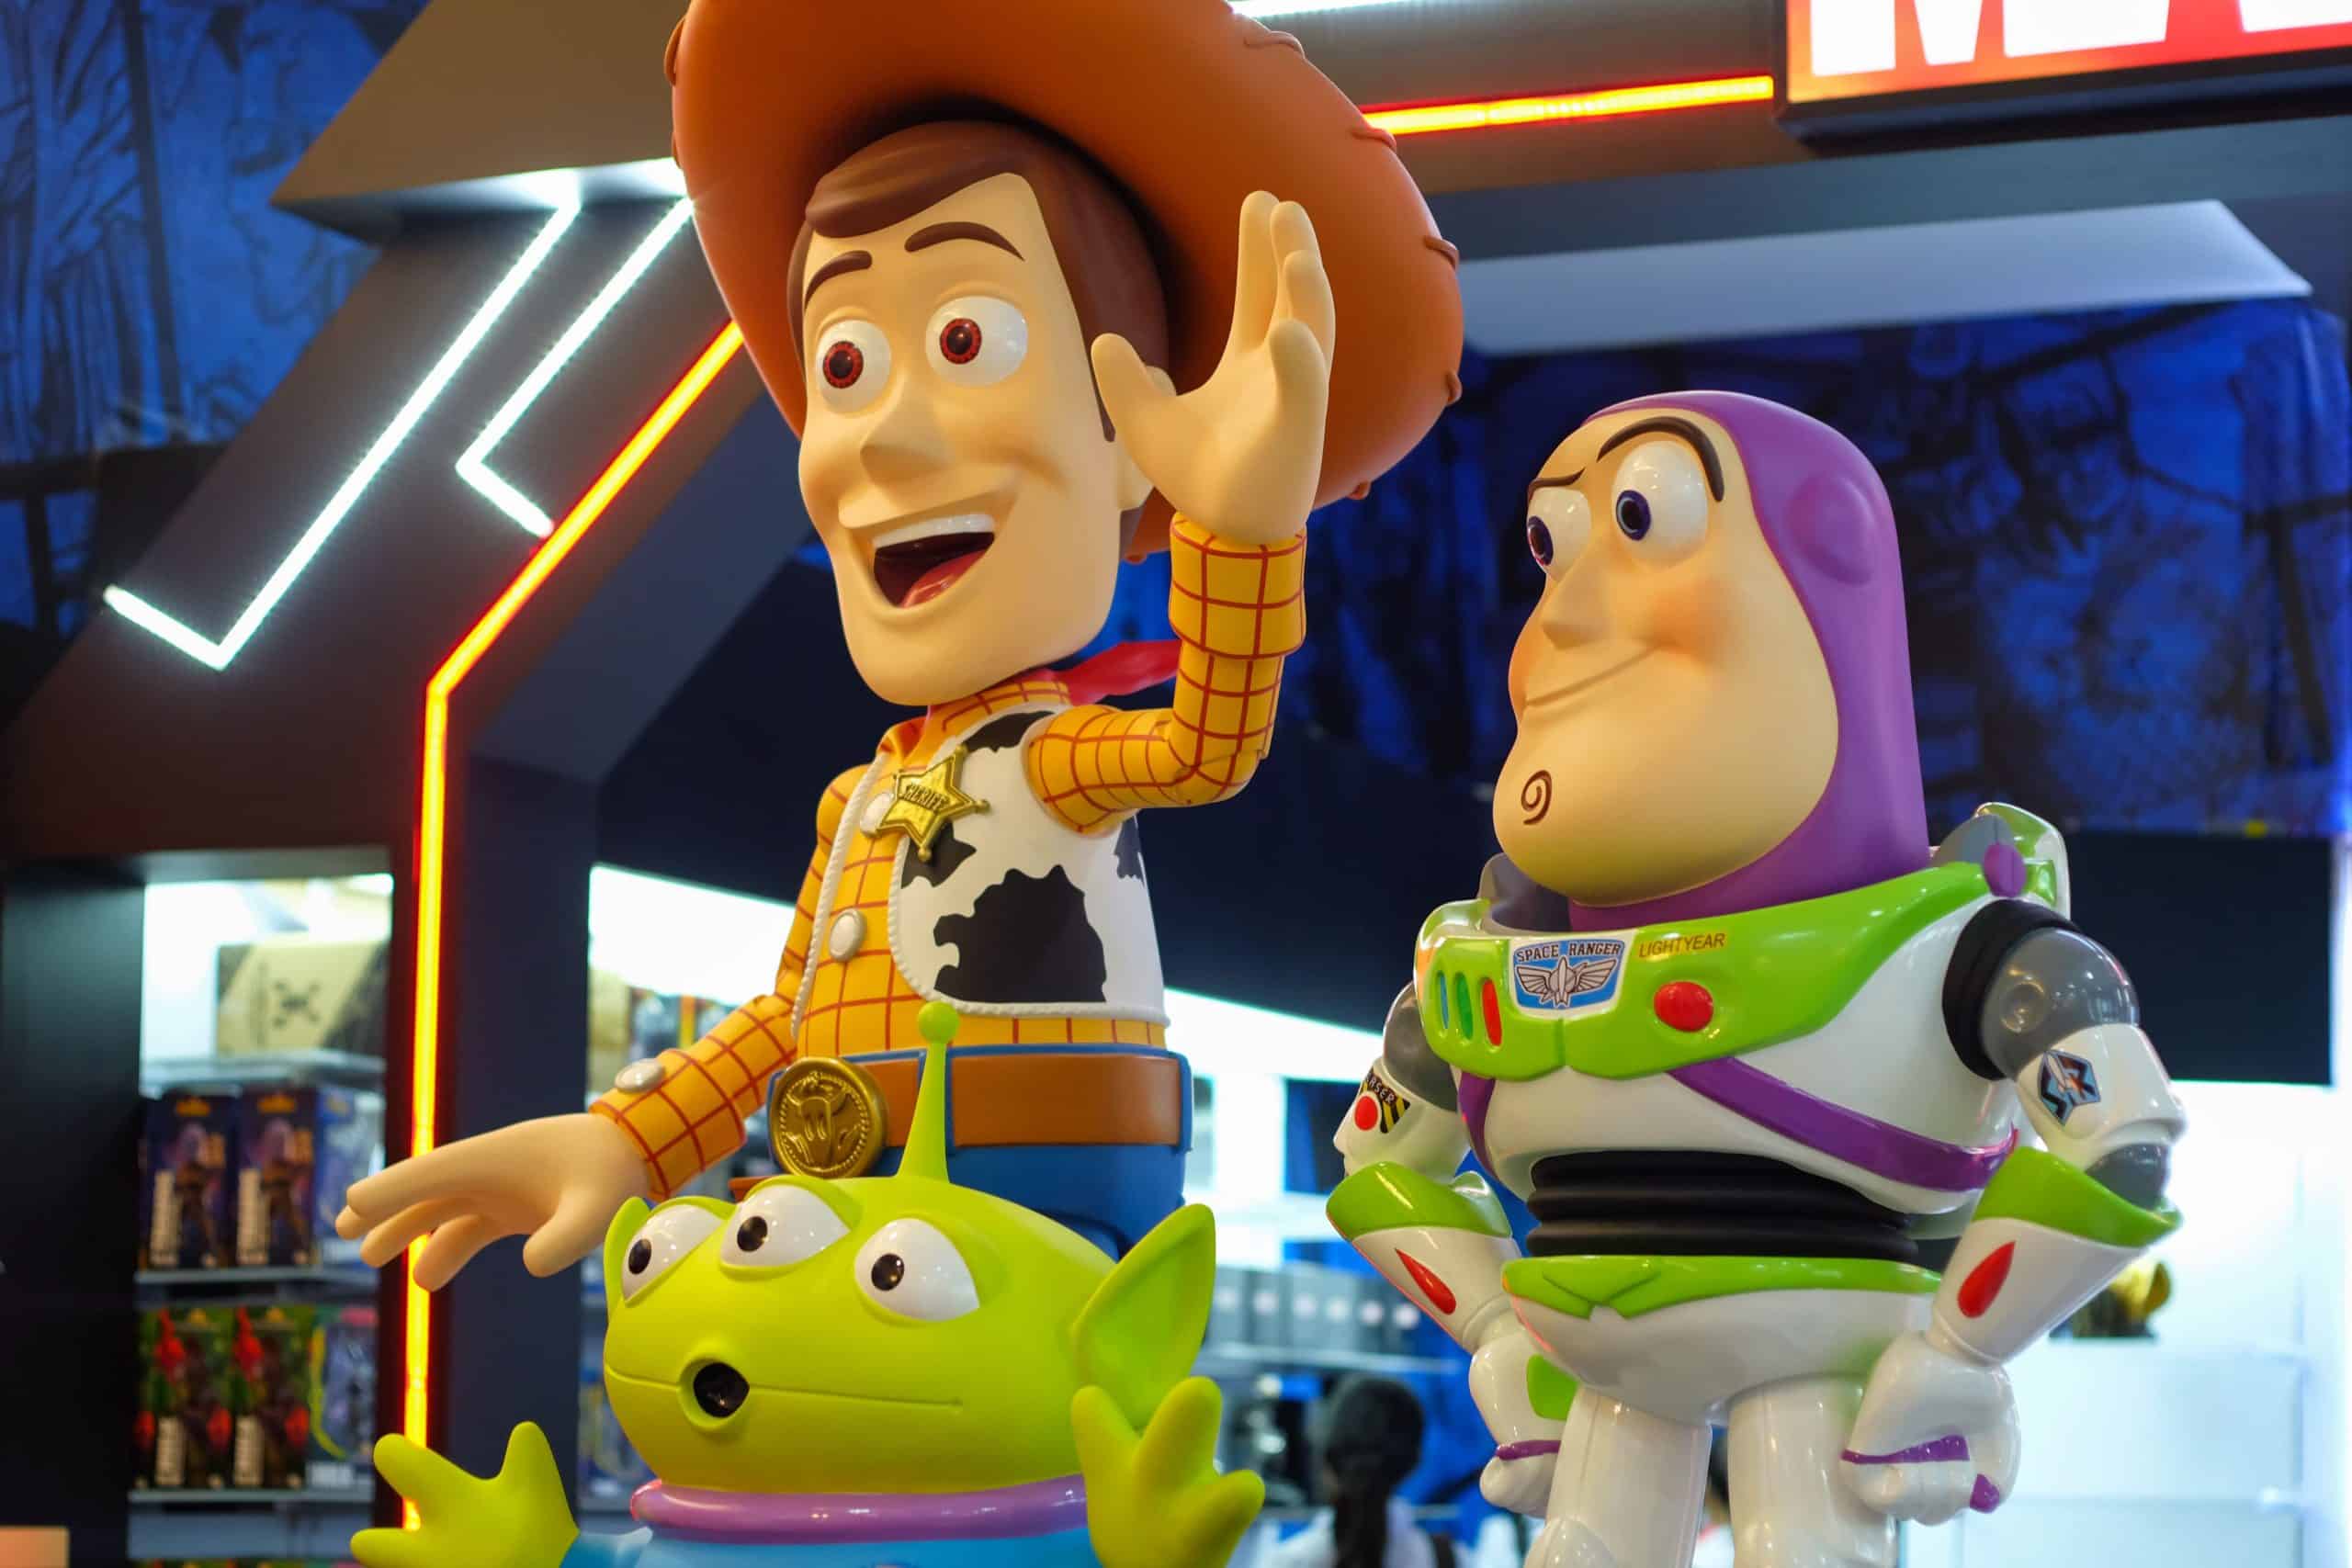 CGI animated Toy Story characters